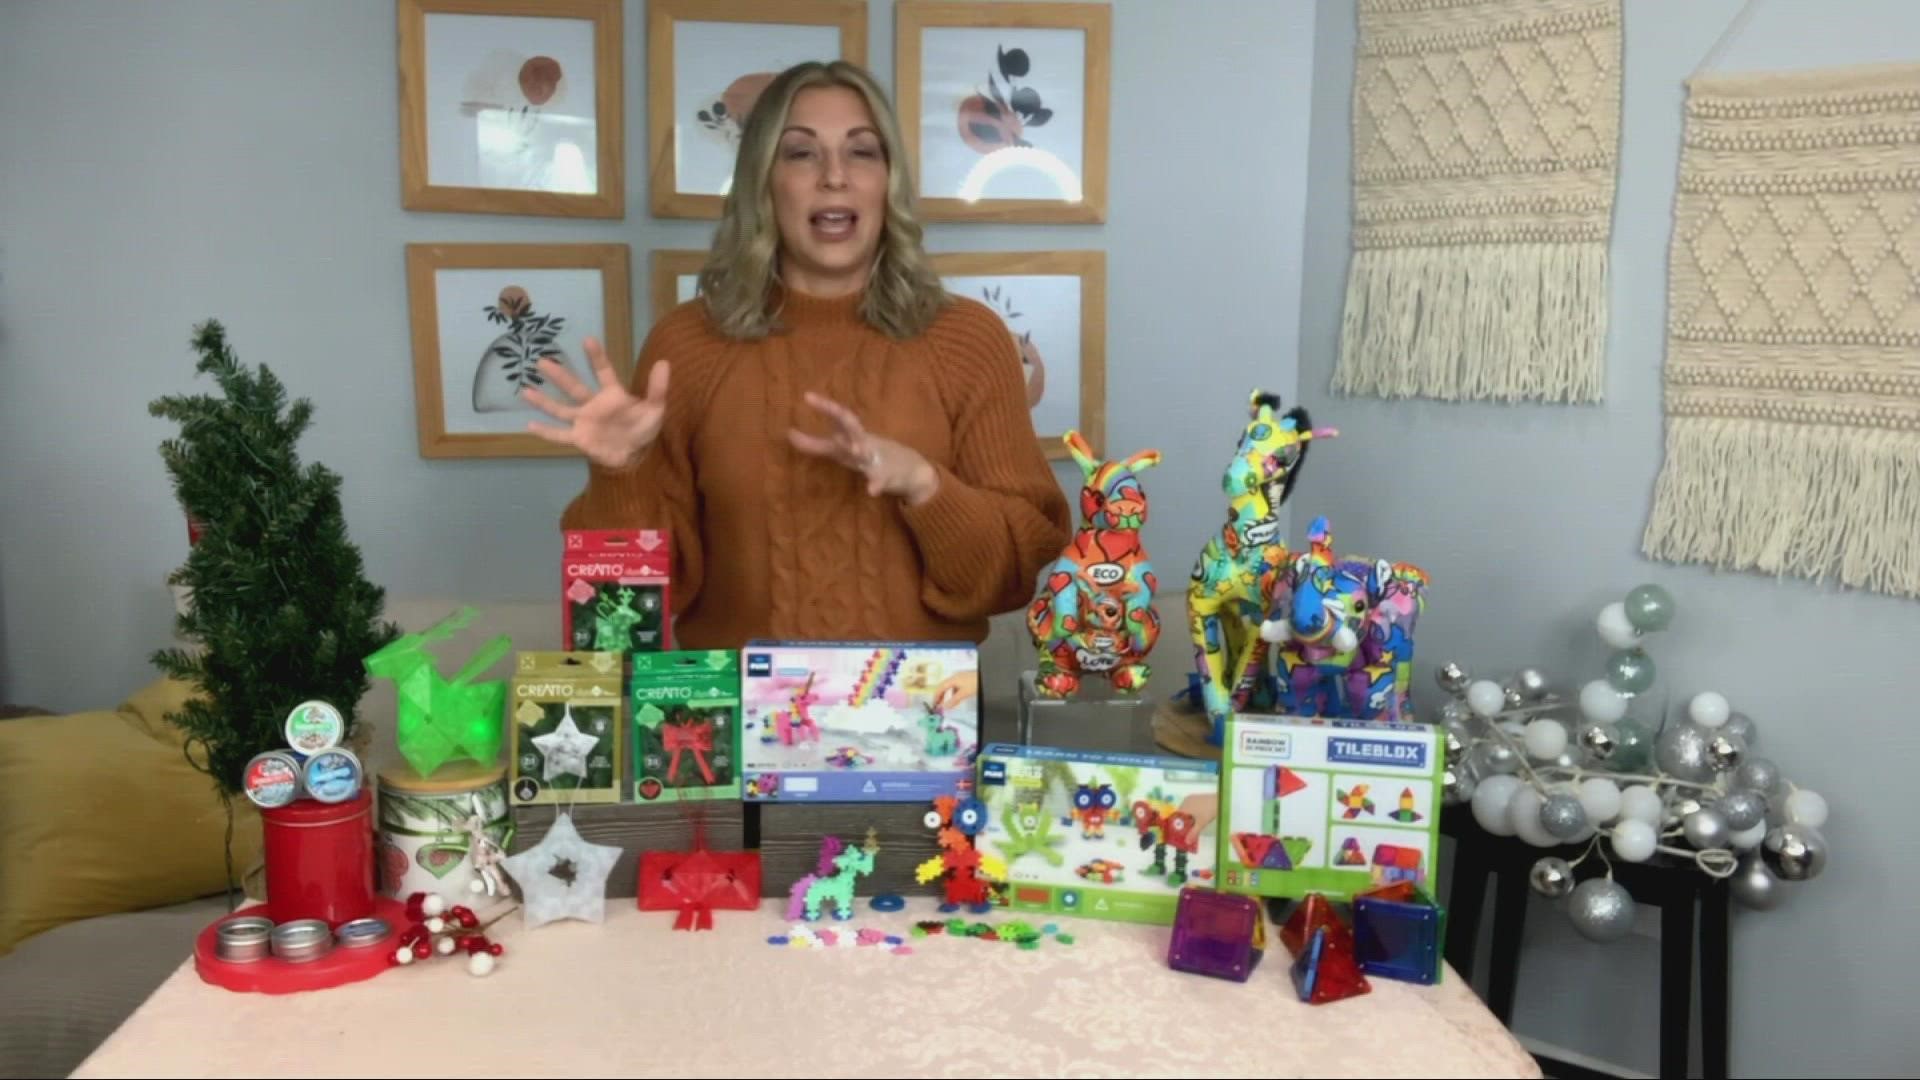 Looking for the right toy? 3News' Maureen Kyle talks with a parenting expert about hot toys you can find this year for less than $25.